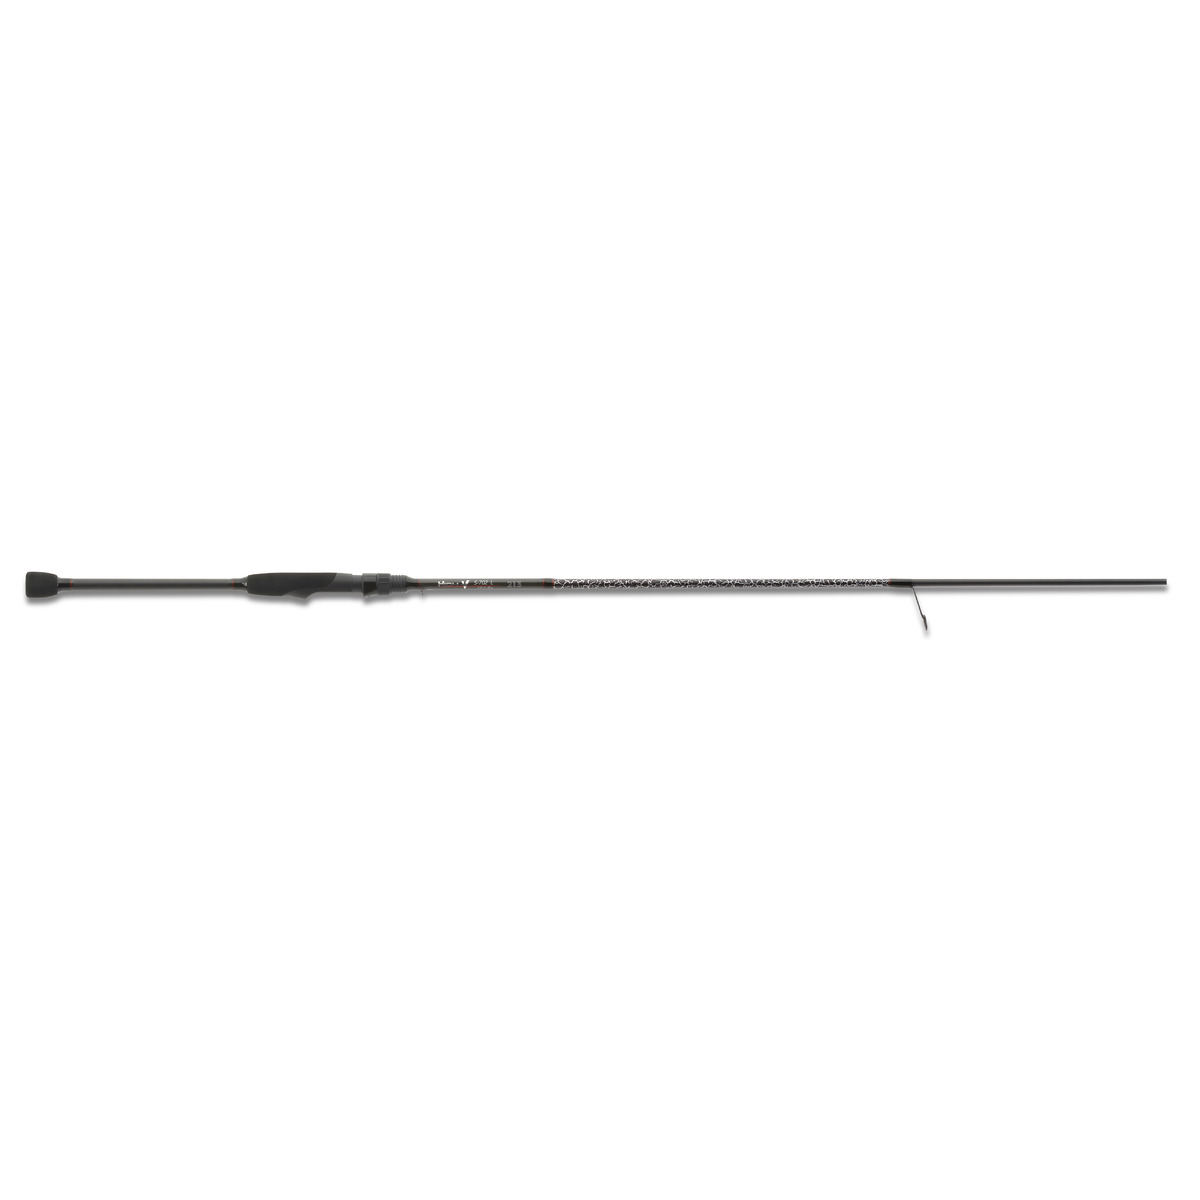 Iron Claw High-v Pike - S-602L 183 3-15 g